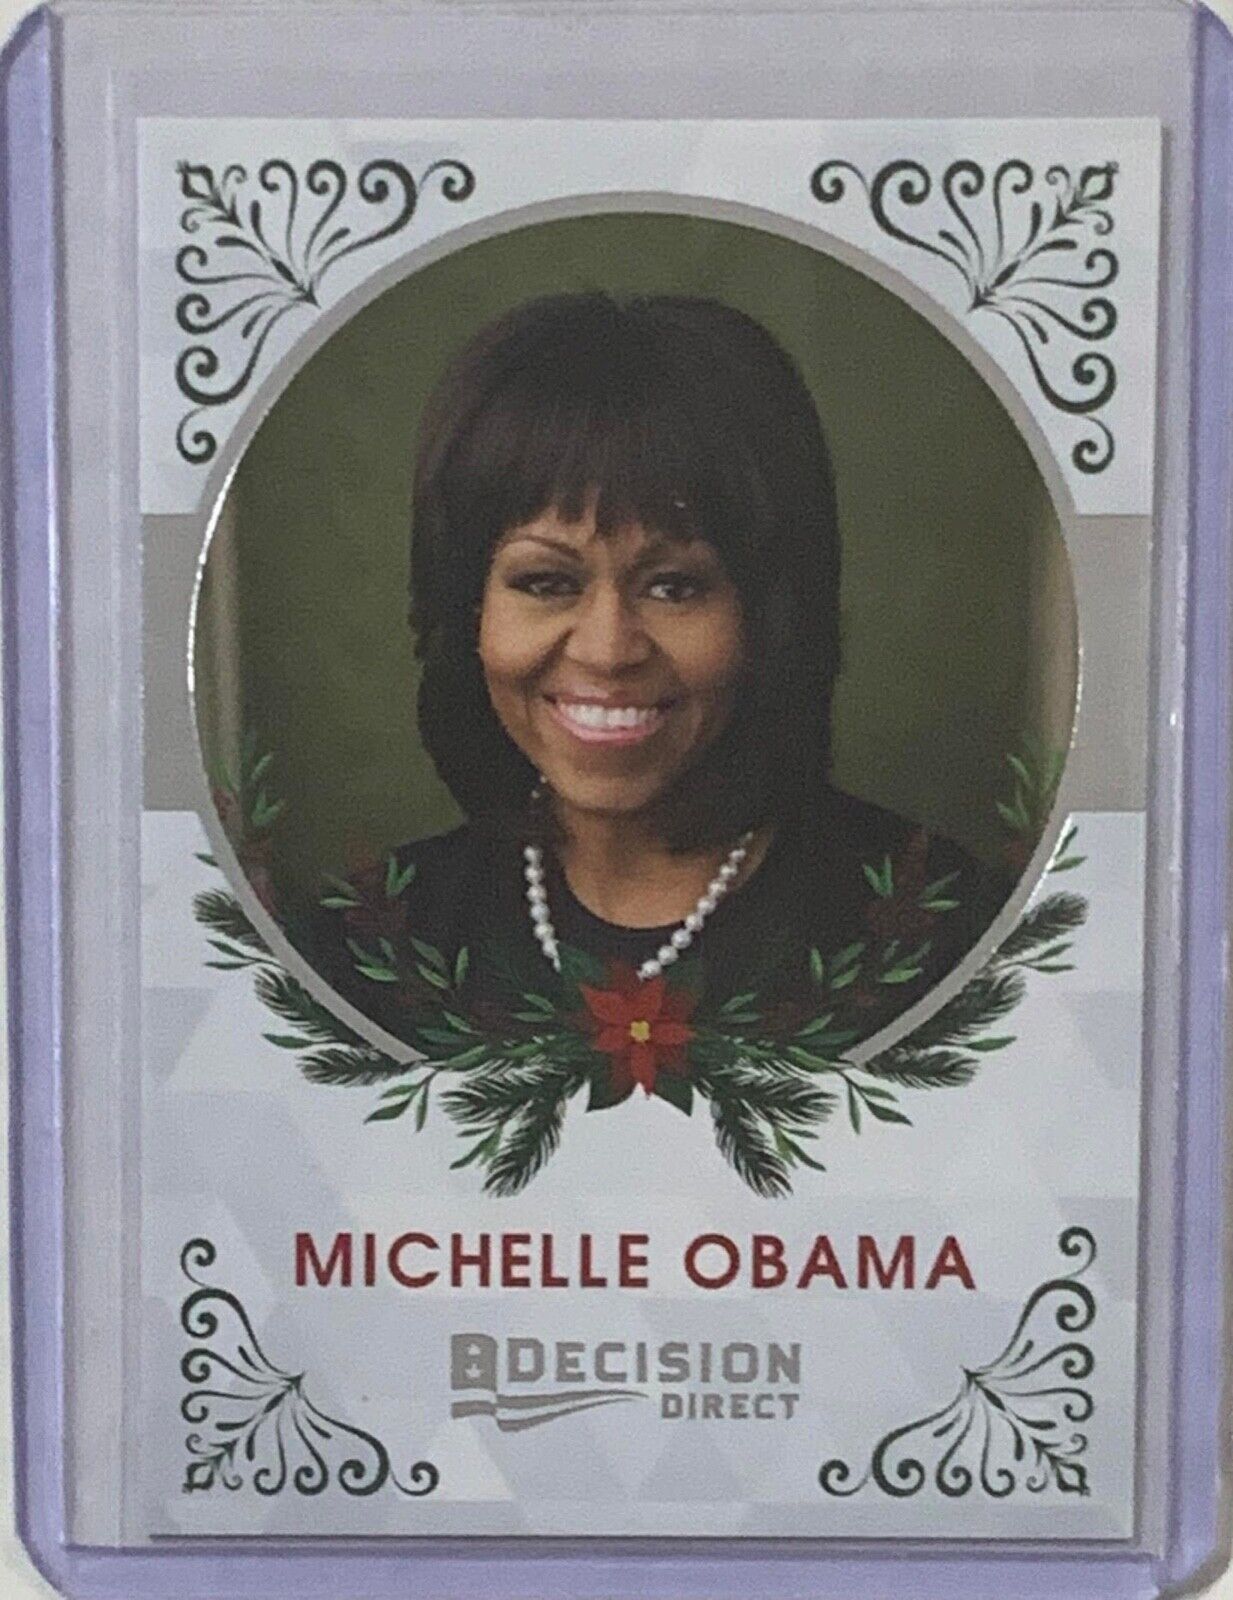 MICHELLE OBAMA FORMER 1st LADY 2020 LEAF CARD COMPANY ONLY 500 CARDS MADE